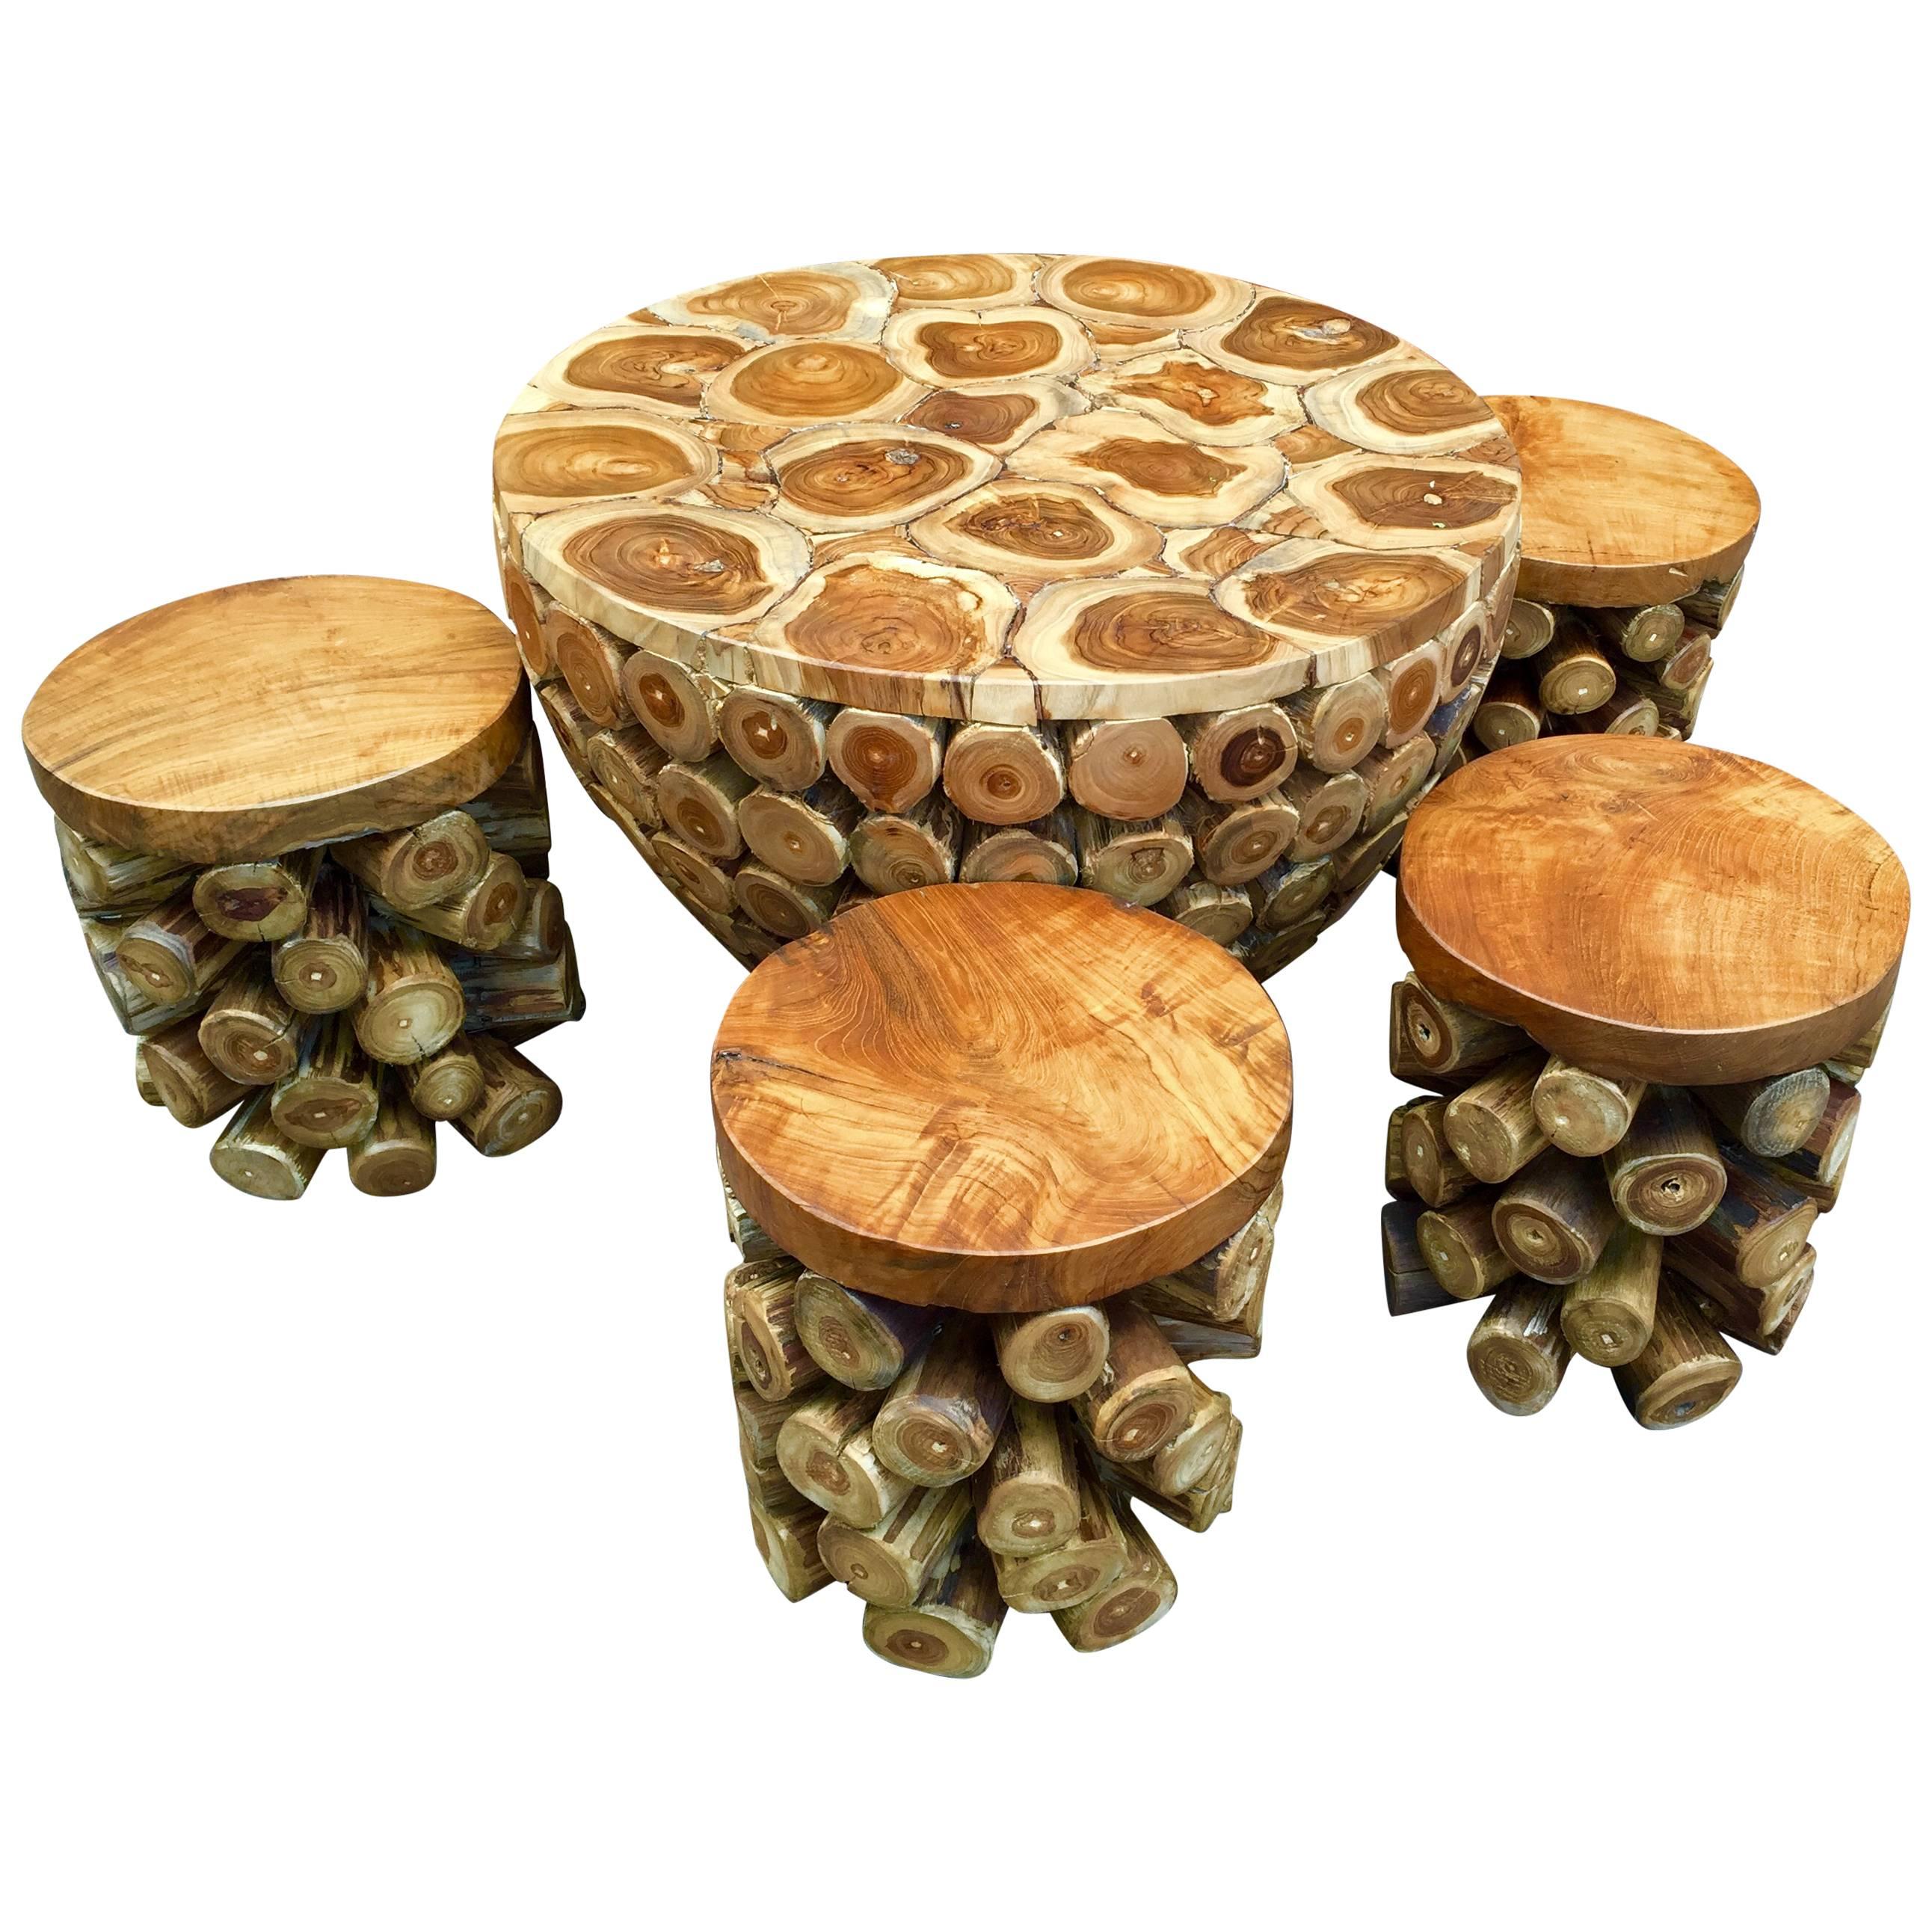 Unique Teak Root "Drum" Set of Table and Four Stools